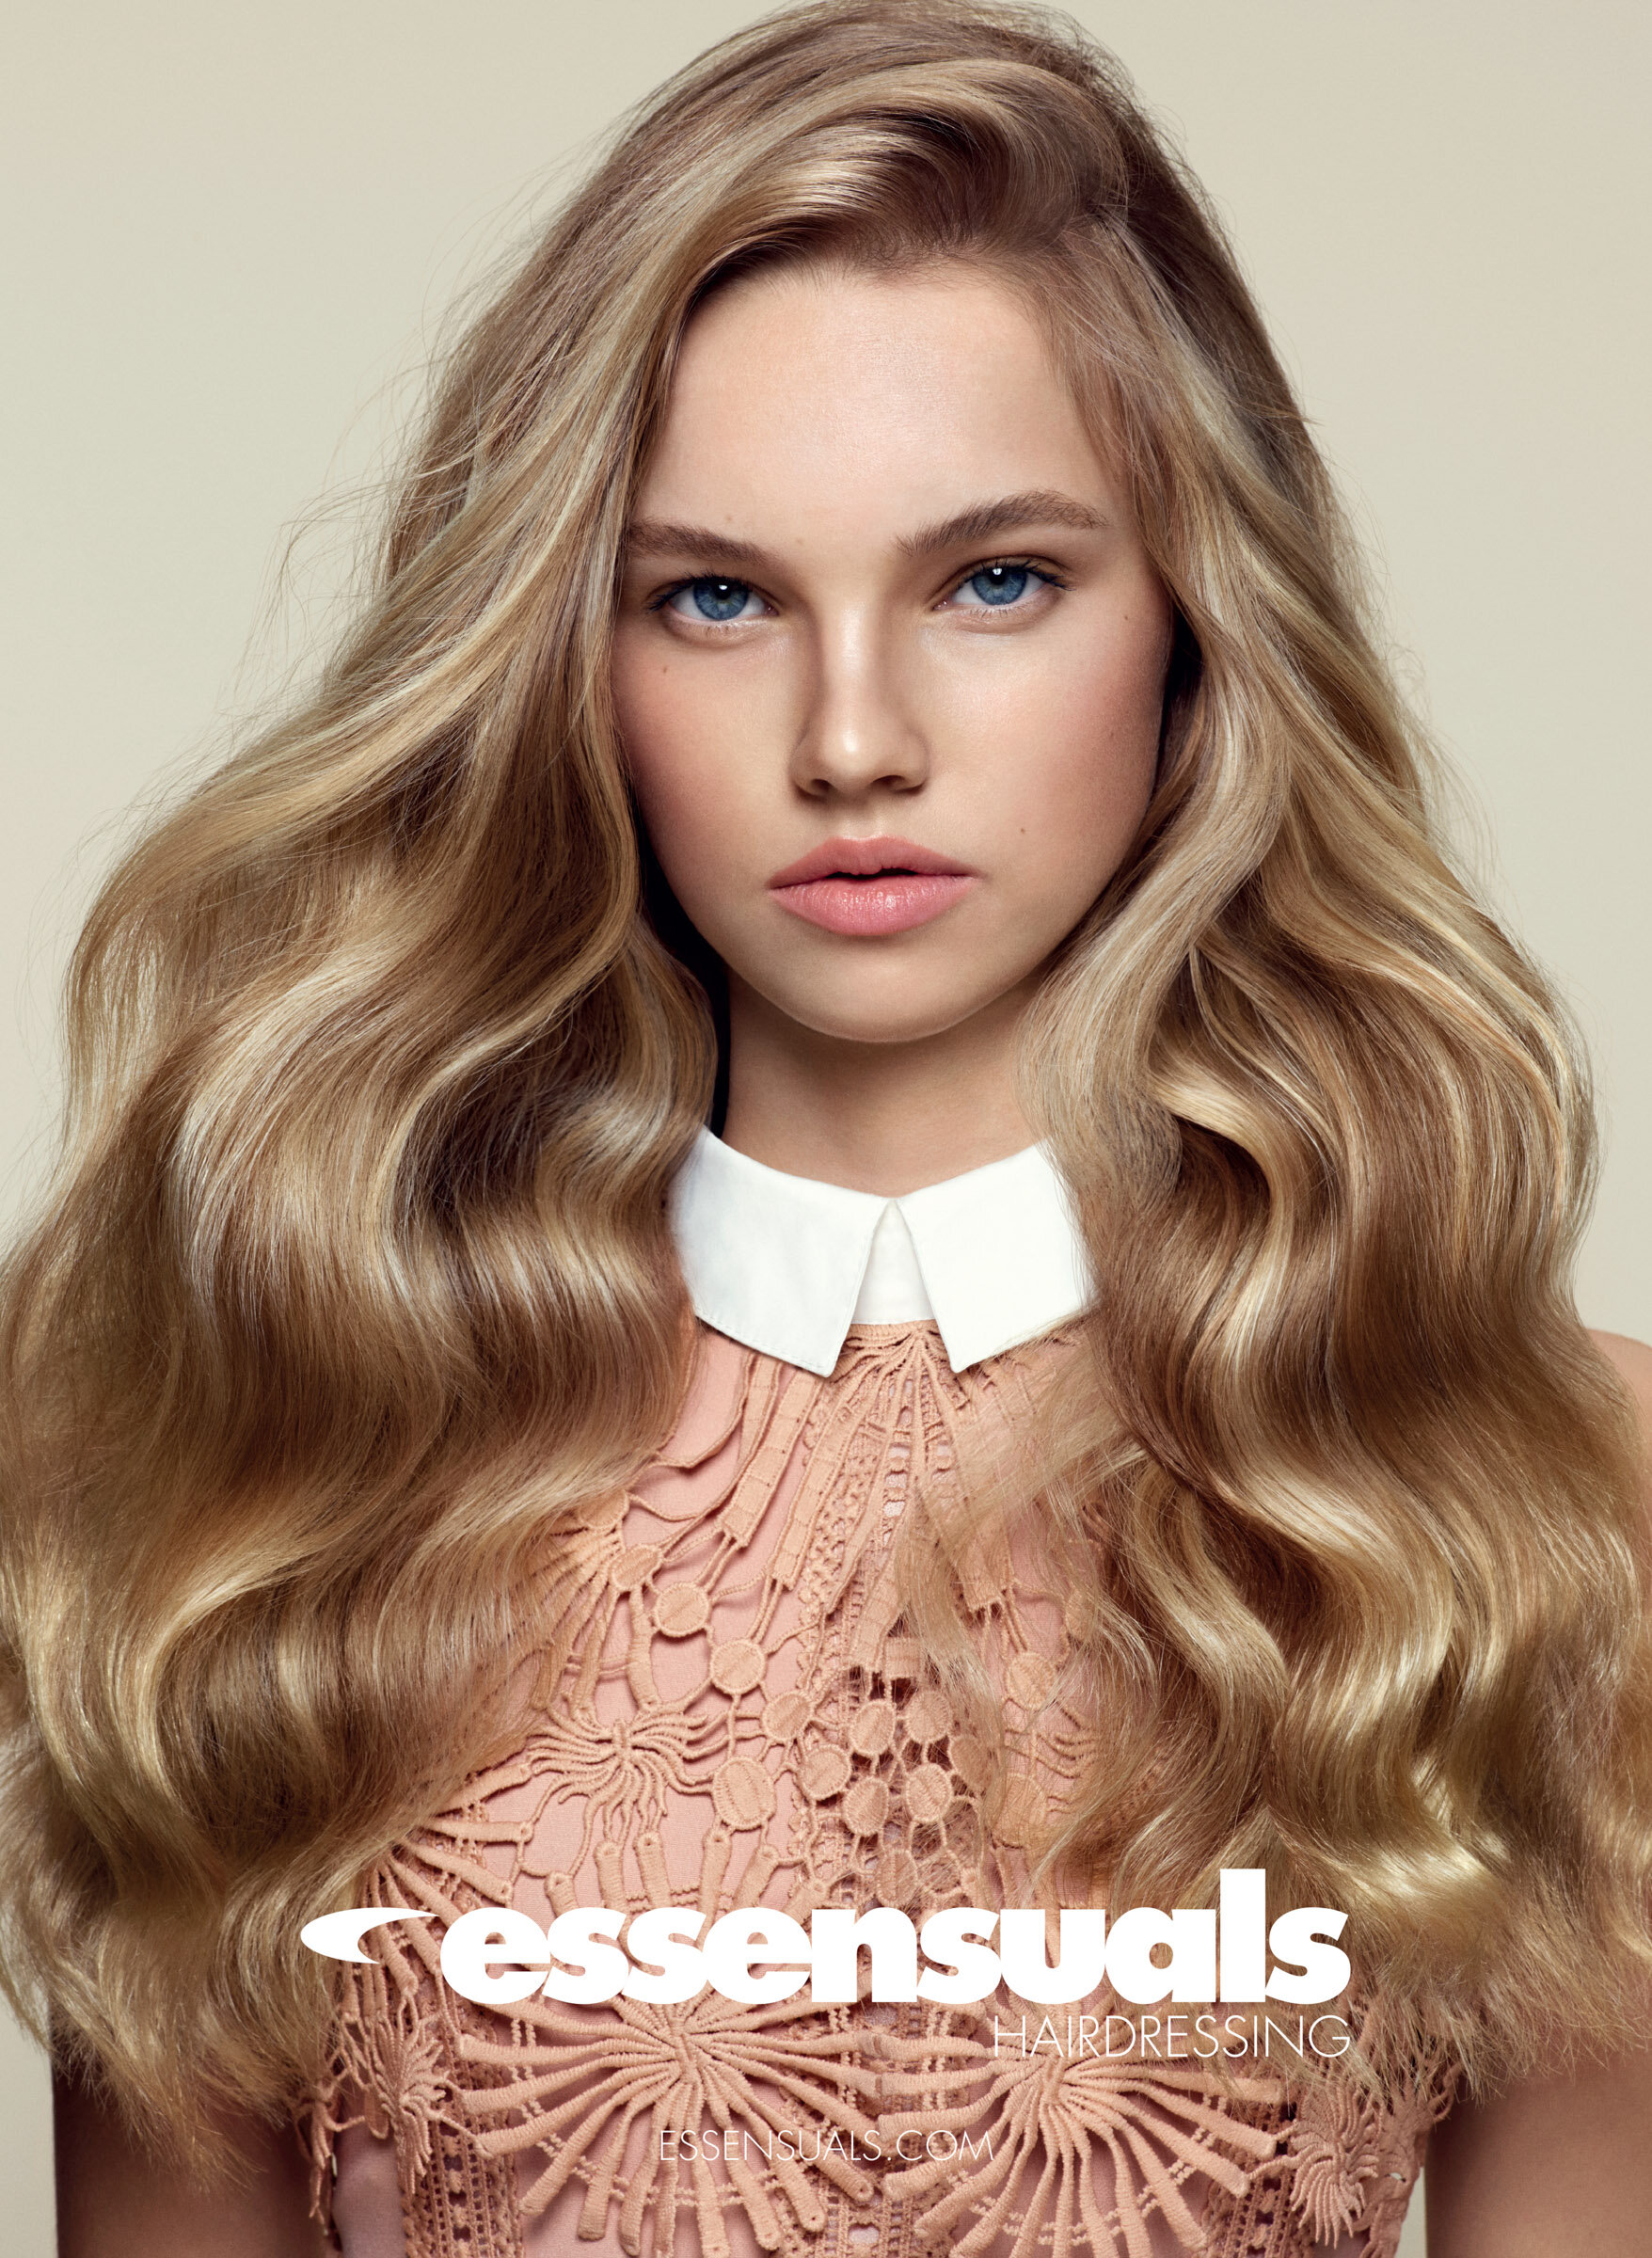 Female model with shiny long blonde hair for Essensuals hair campaign